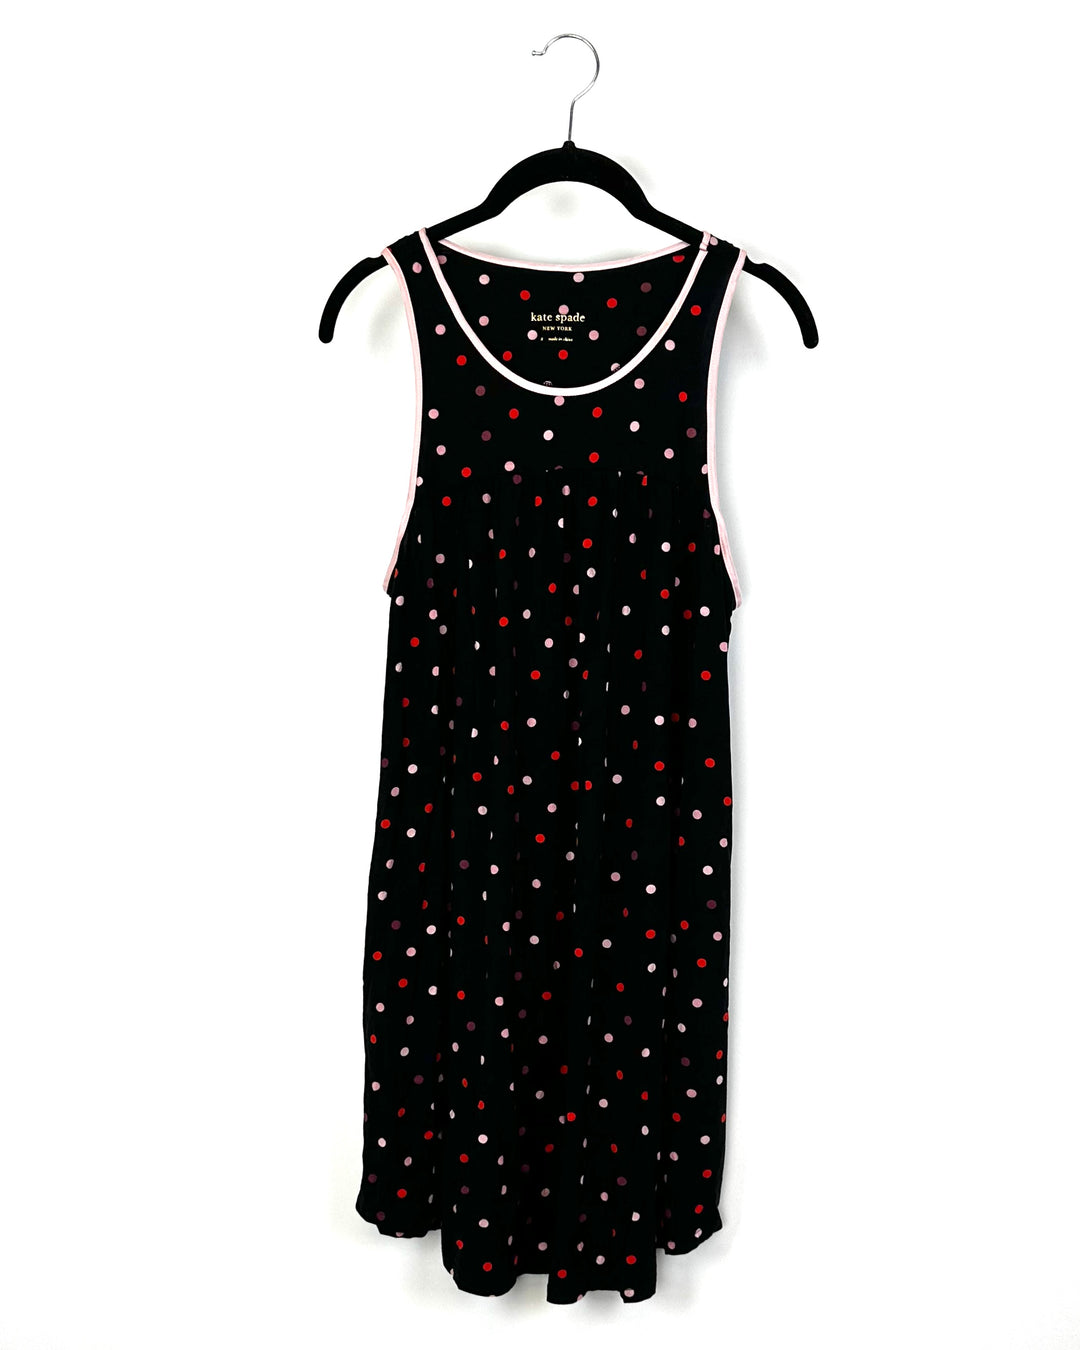 Black and Pink Polka Dot Nightgown - Size 4-6